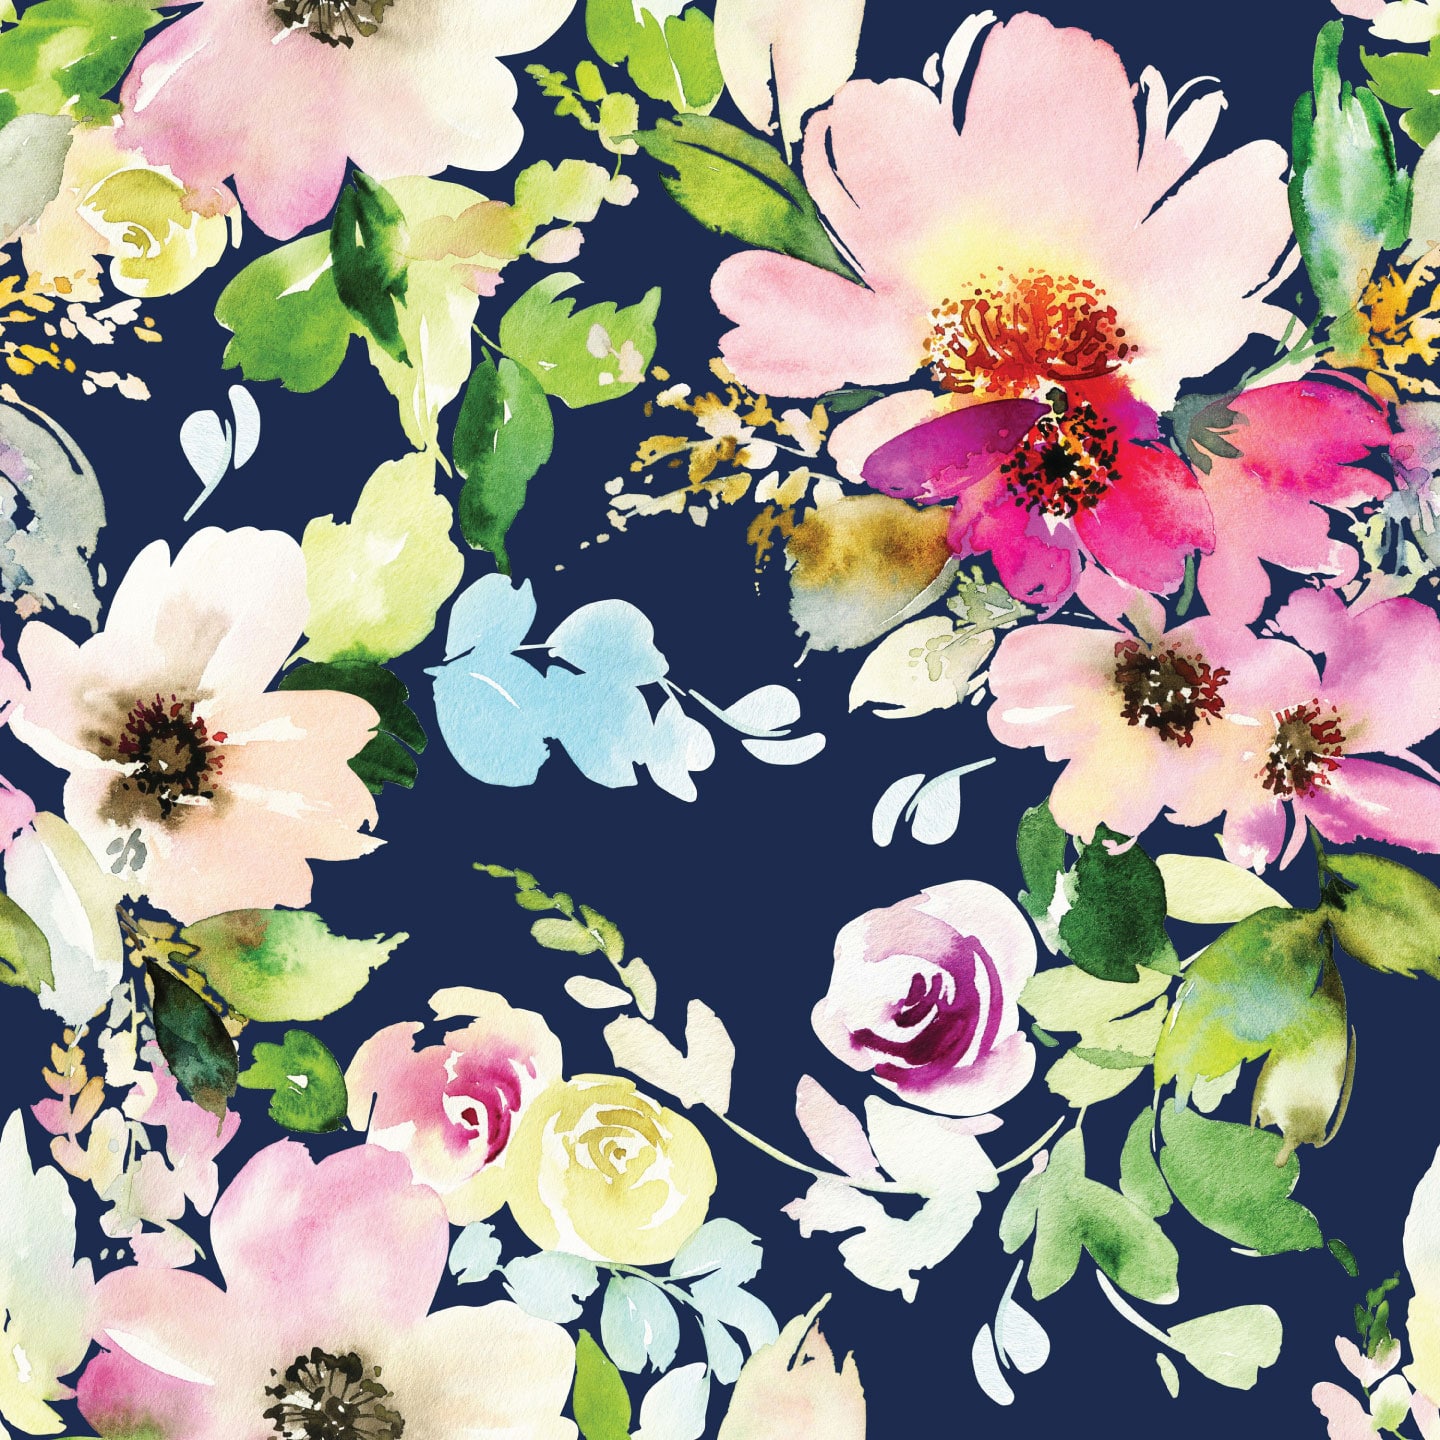 Aesthetic floral wallpaper - Peel and Stick or Non-Pasted